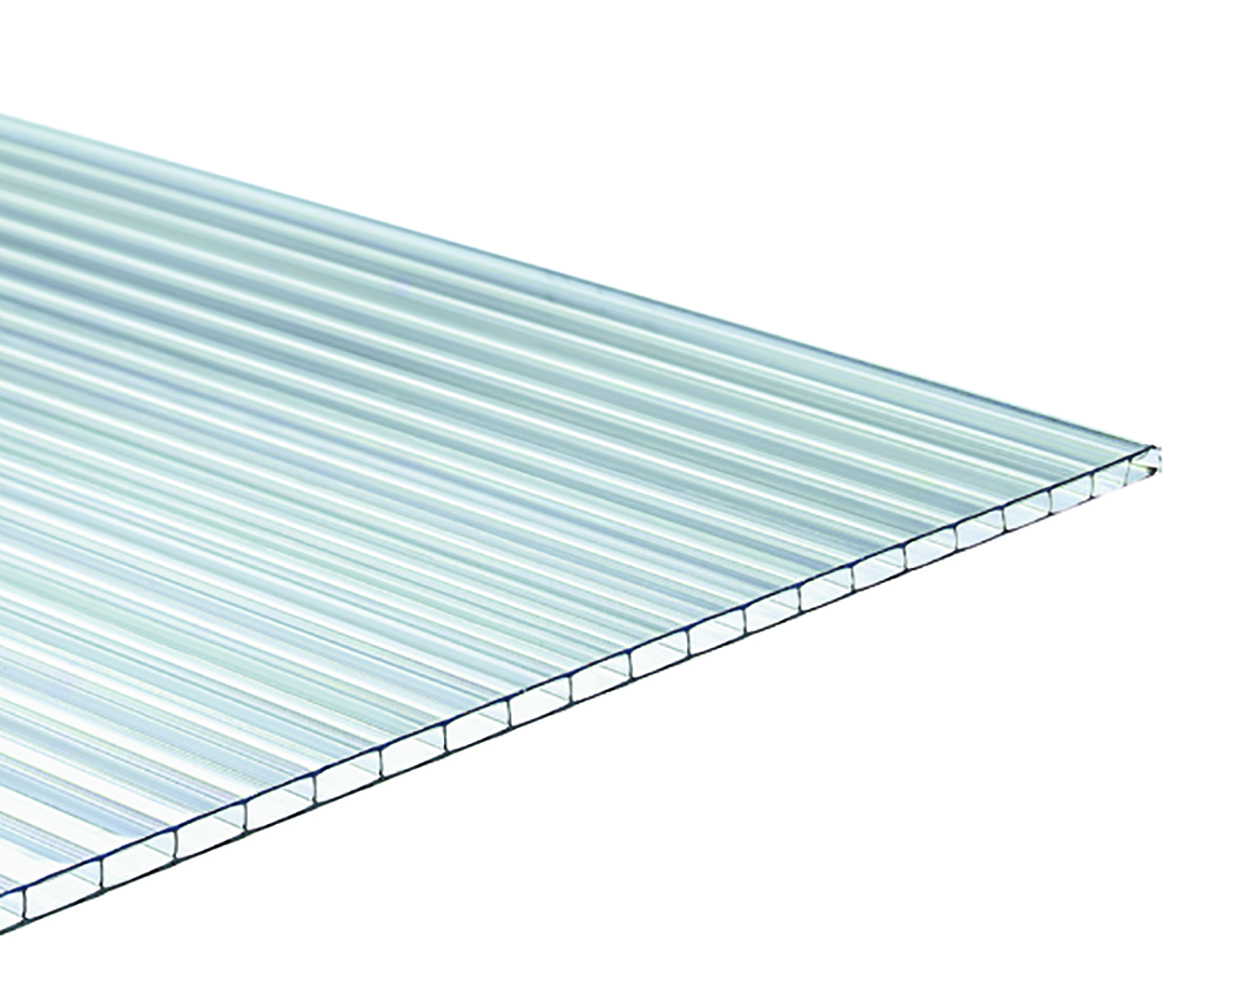 Working with Polycarbonate Sheets